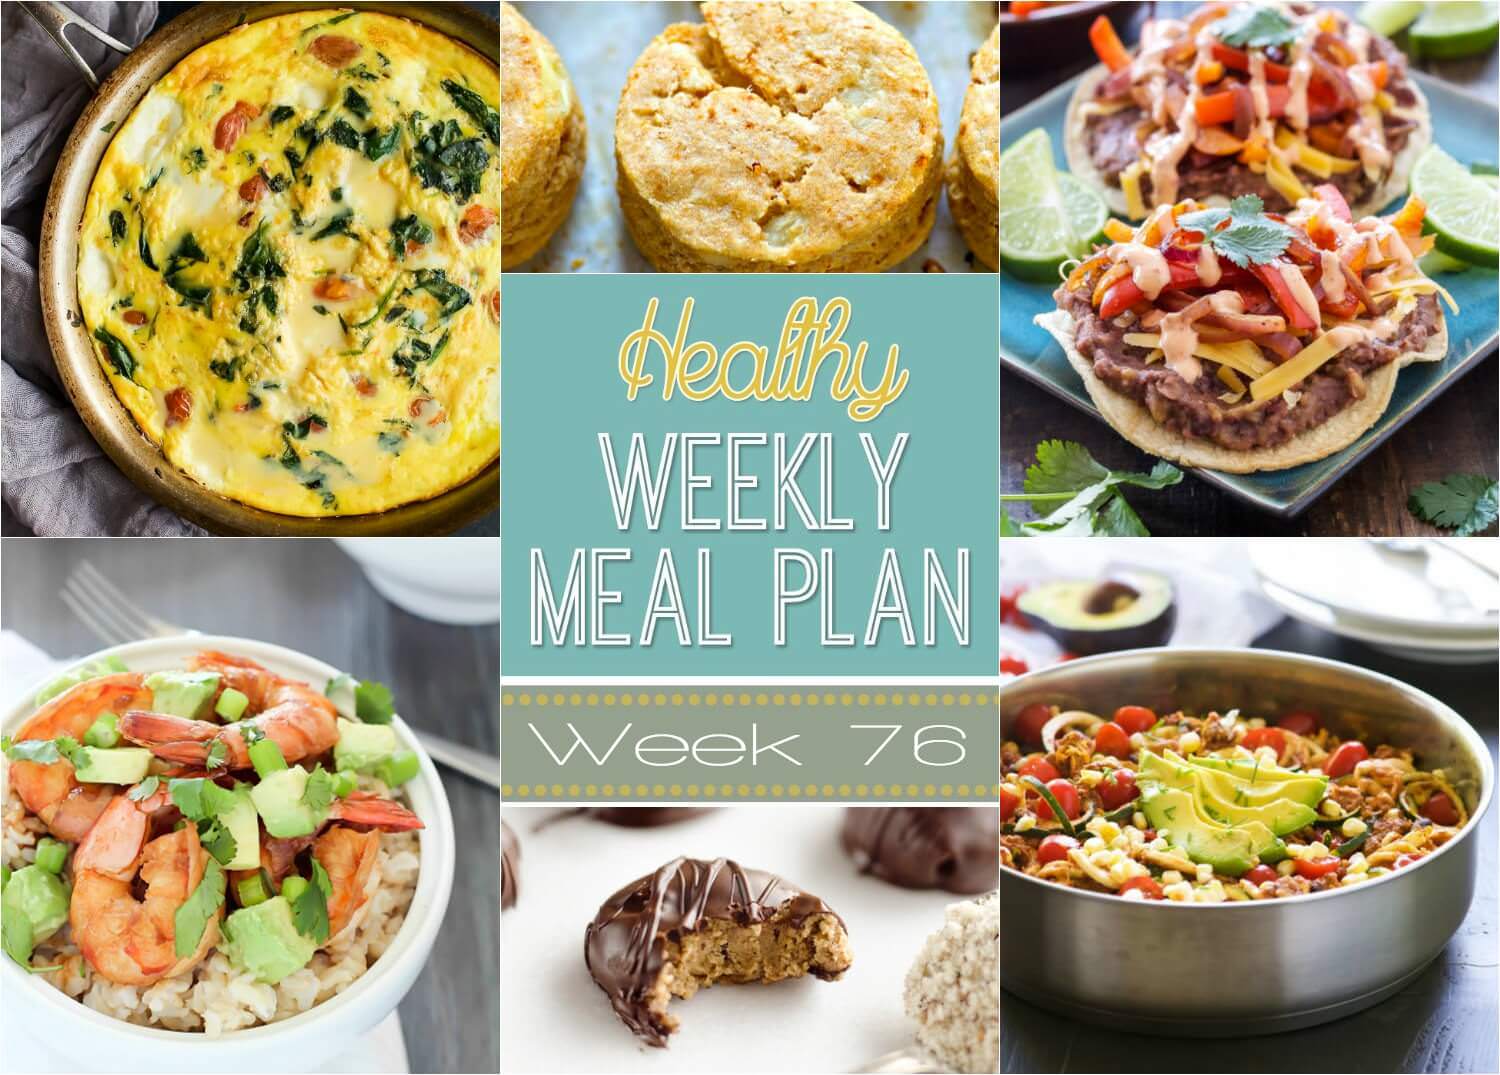 This week for our Healthy Meal Plan, we have a week filled with a Roasted Tomato Caprese Frittata, then a One Pot Cheesy Taco Zucchini Skillet and Protein Peanut Butter Truffles!